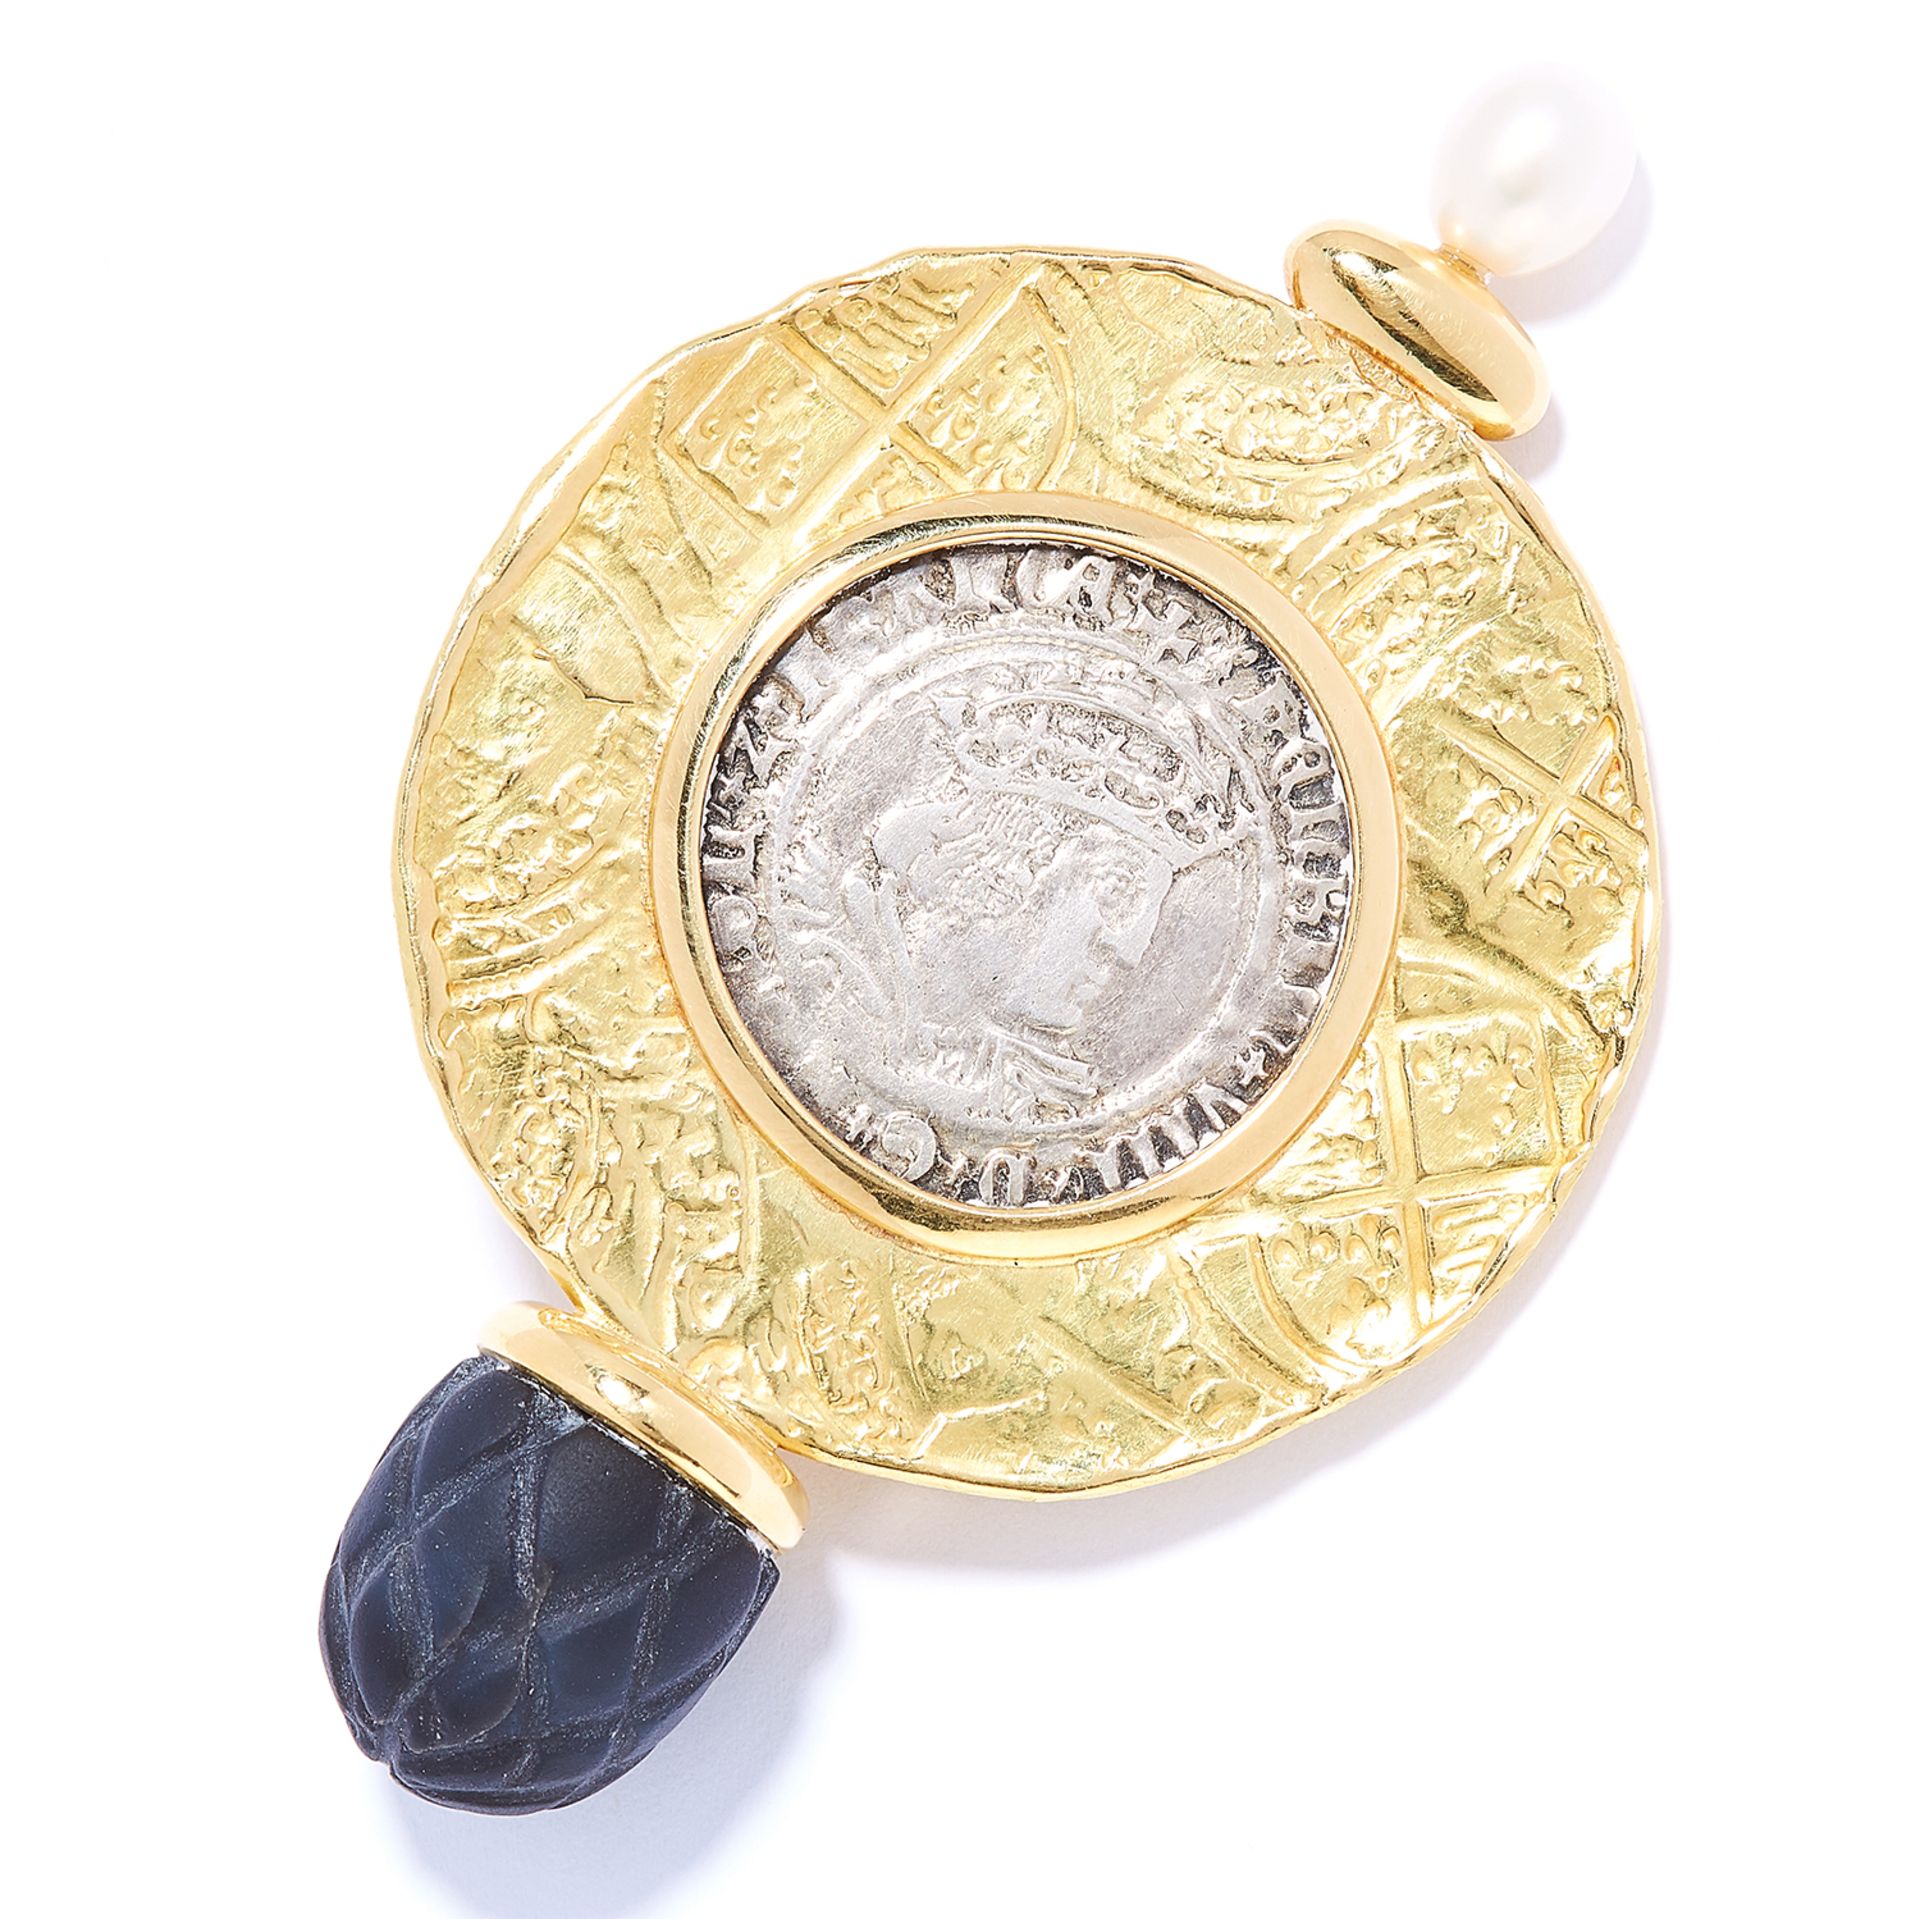 TUDOR COIN, PEARL AND BLACK HARDSTONE BROOCH, ELIZABETH GAGE, 1993 in 18ct yellow gold, comprising